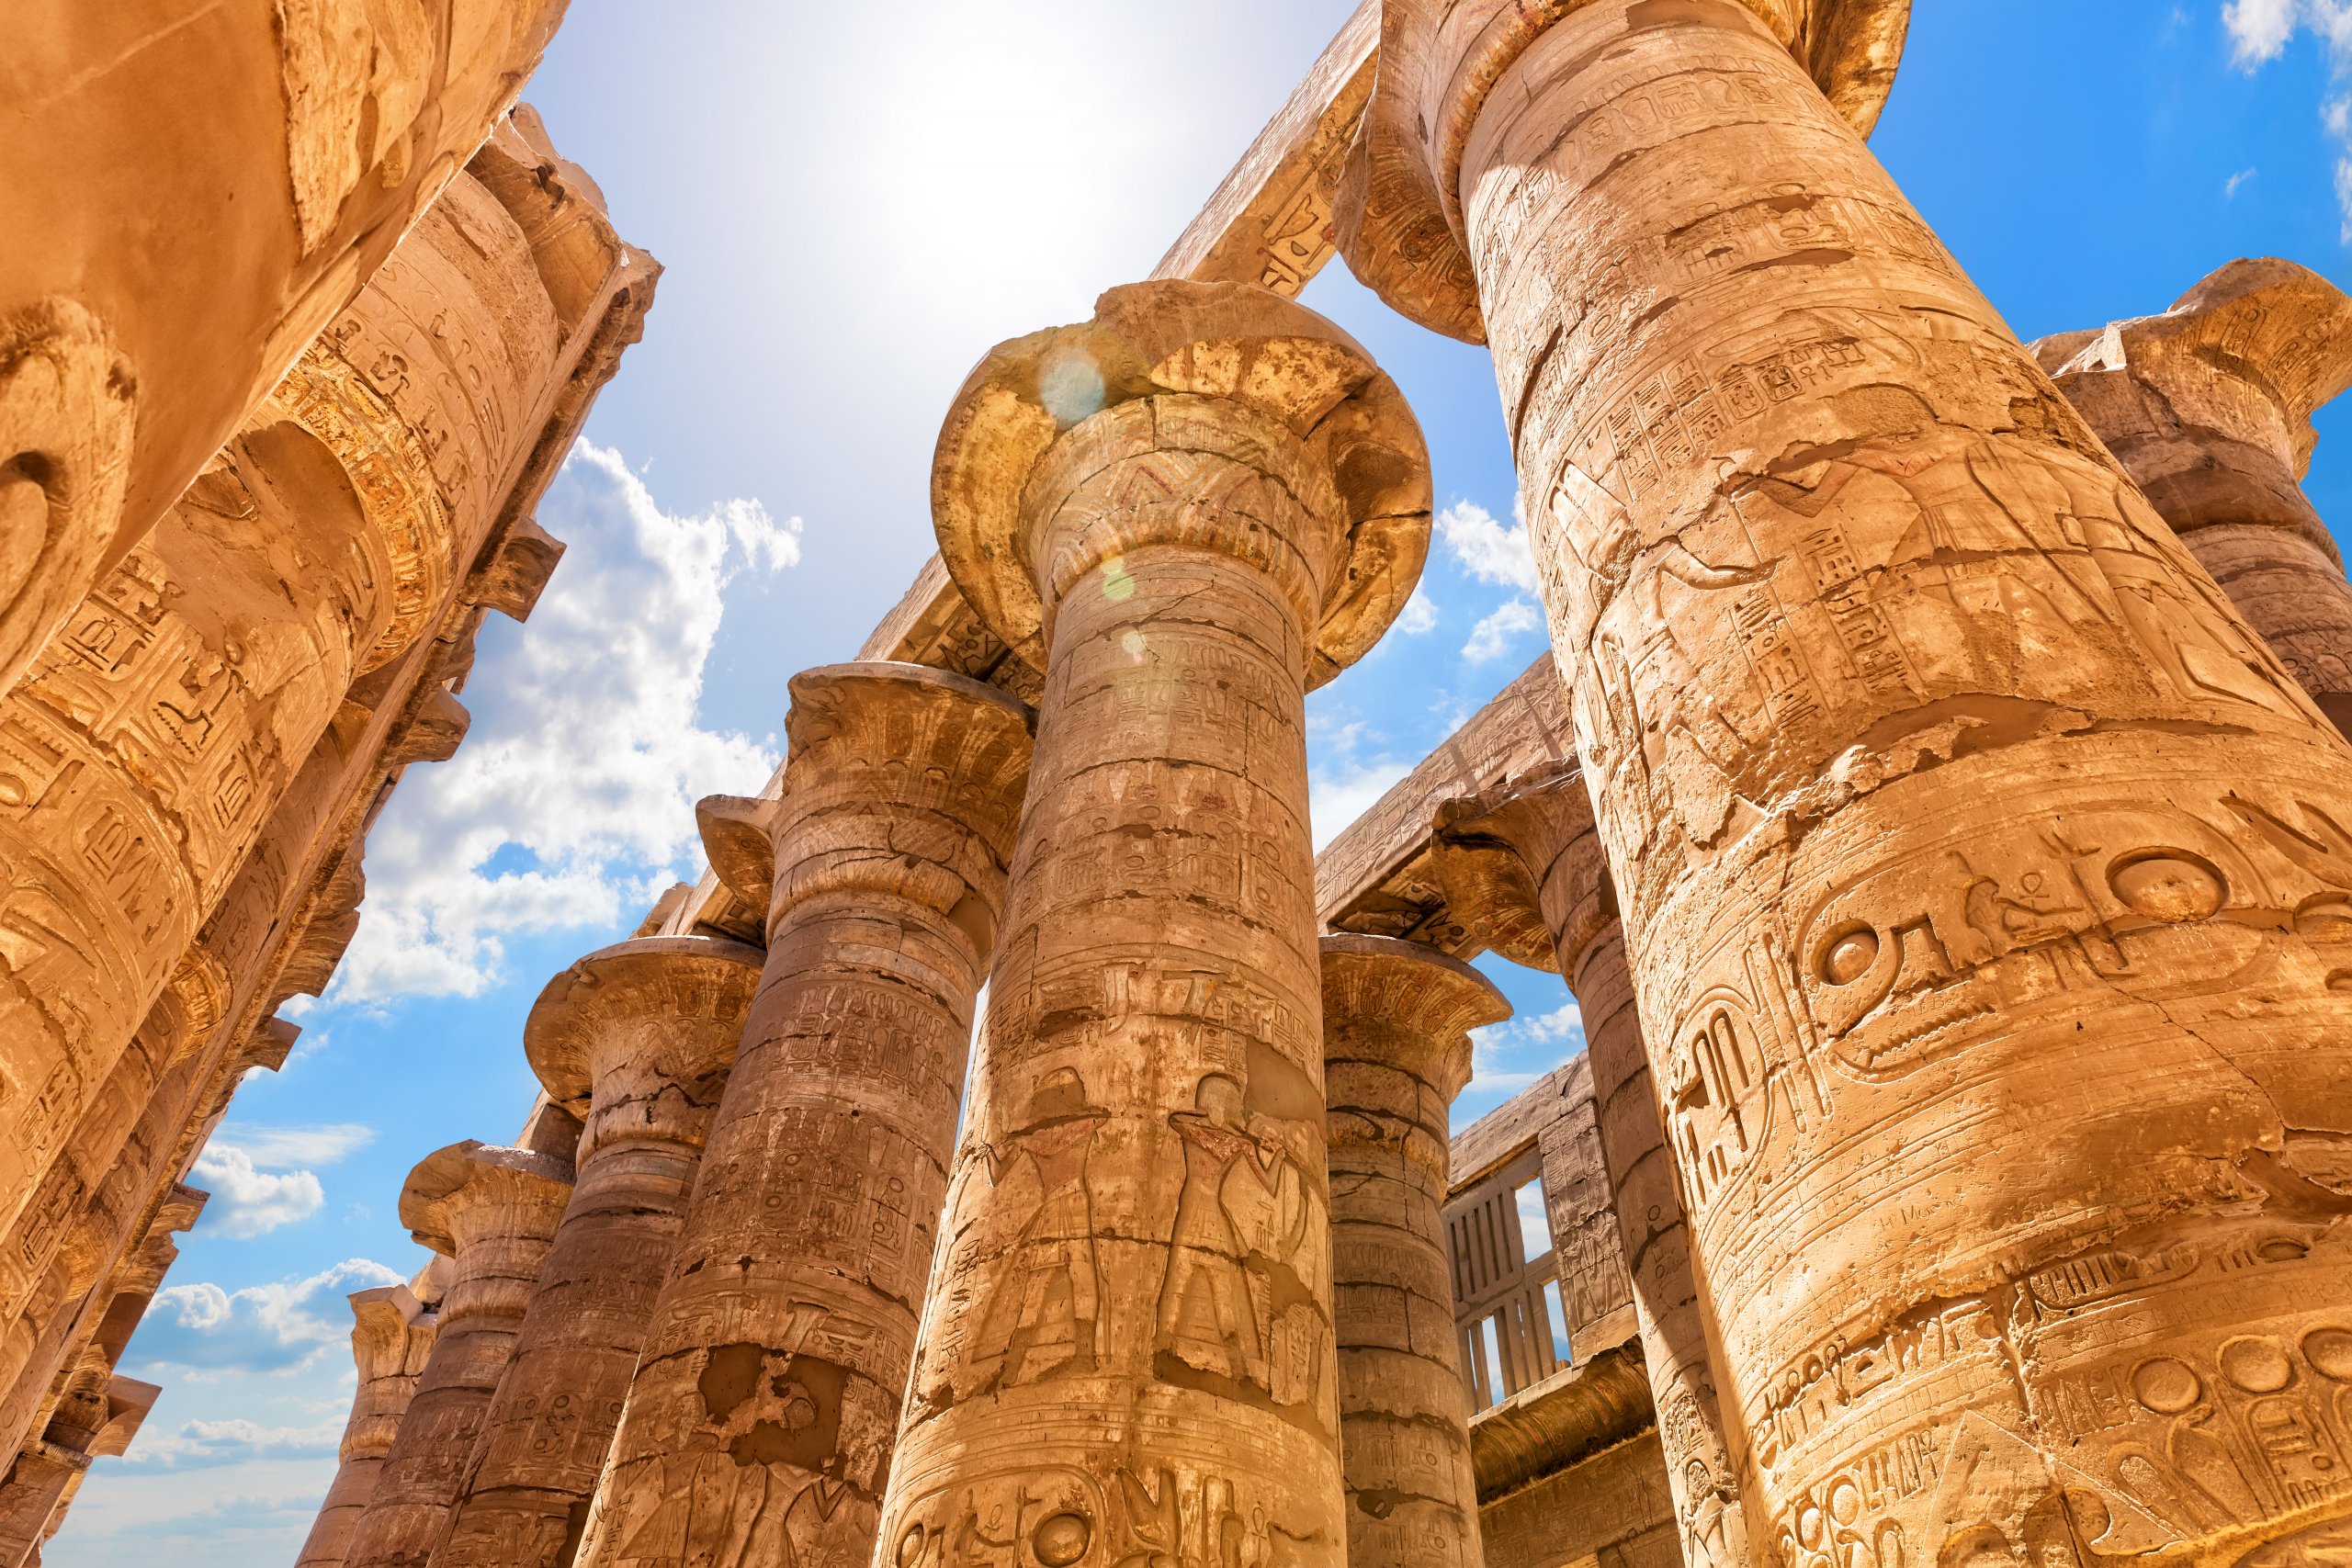 Great Hypostyle Hall, columns with ancient carvings, Karnak Temple, Luxor, Egypt